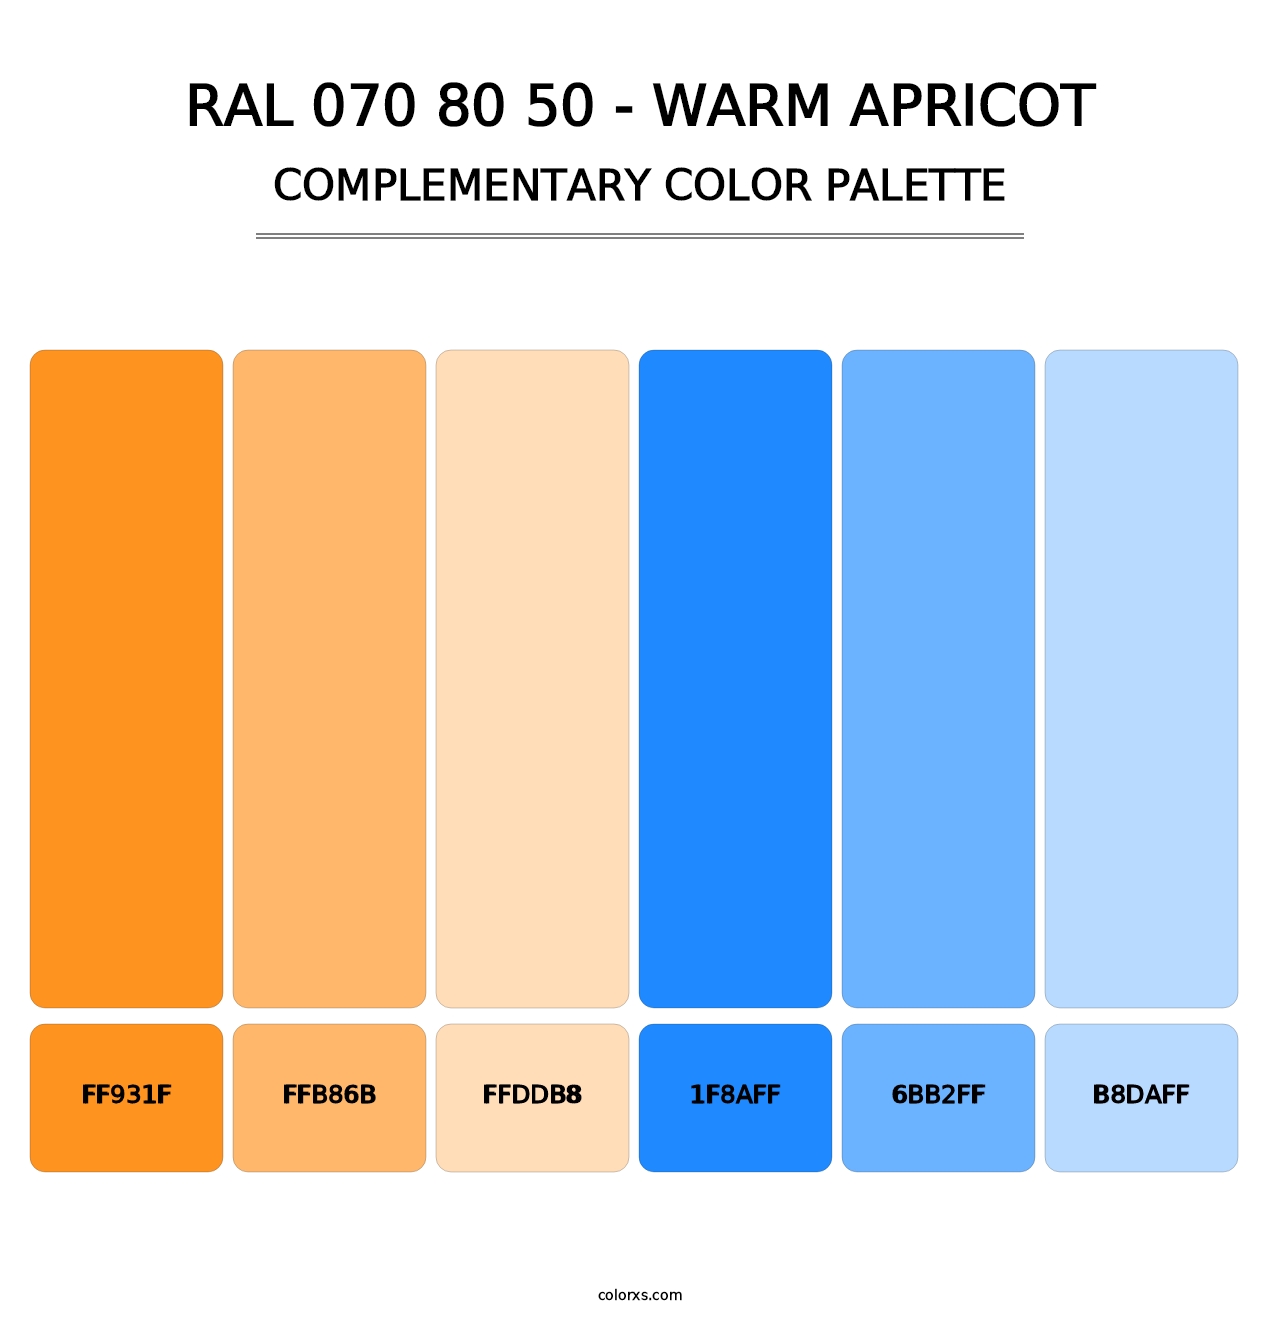 RAL 070 80 50 - Warm Apricot - Complementary Color Palette